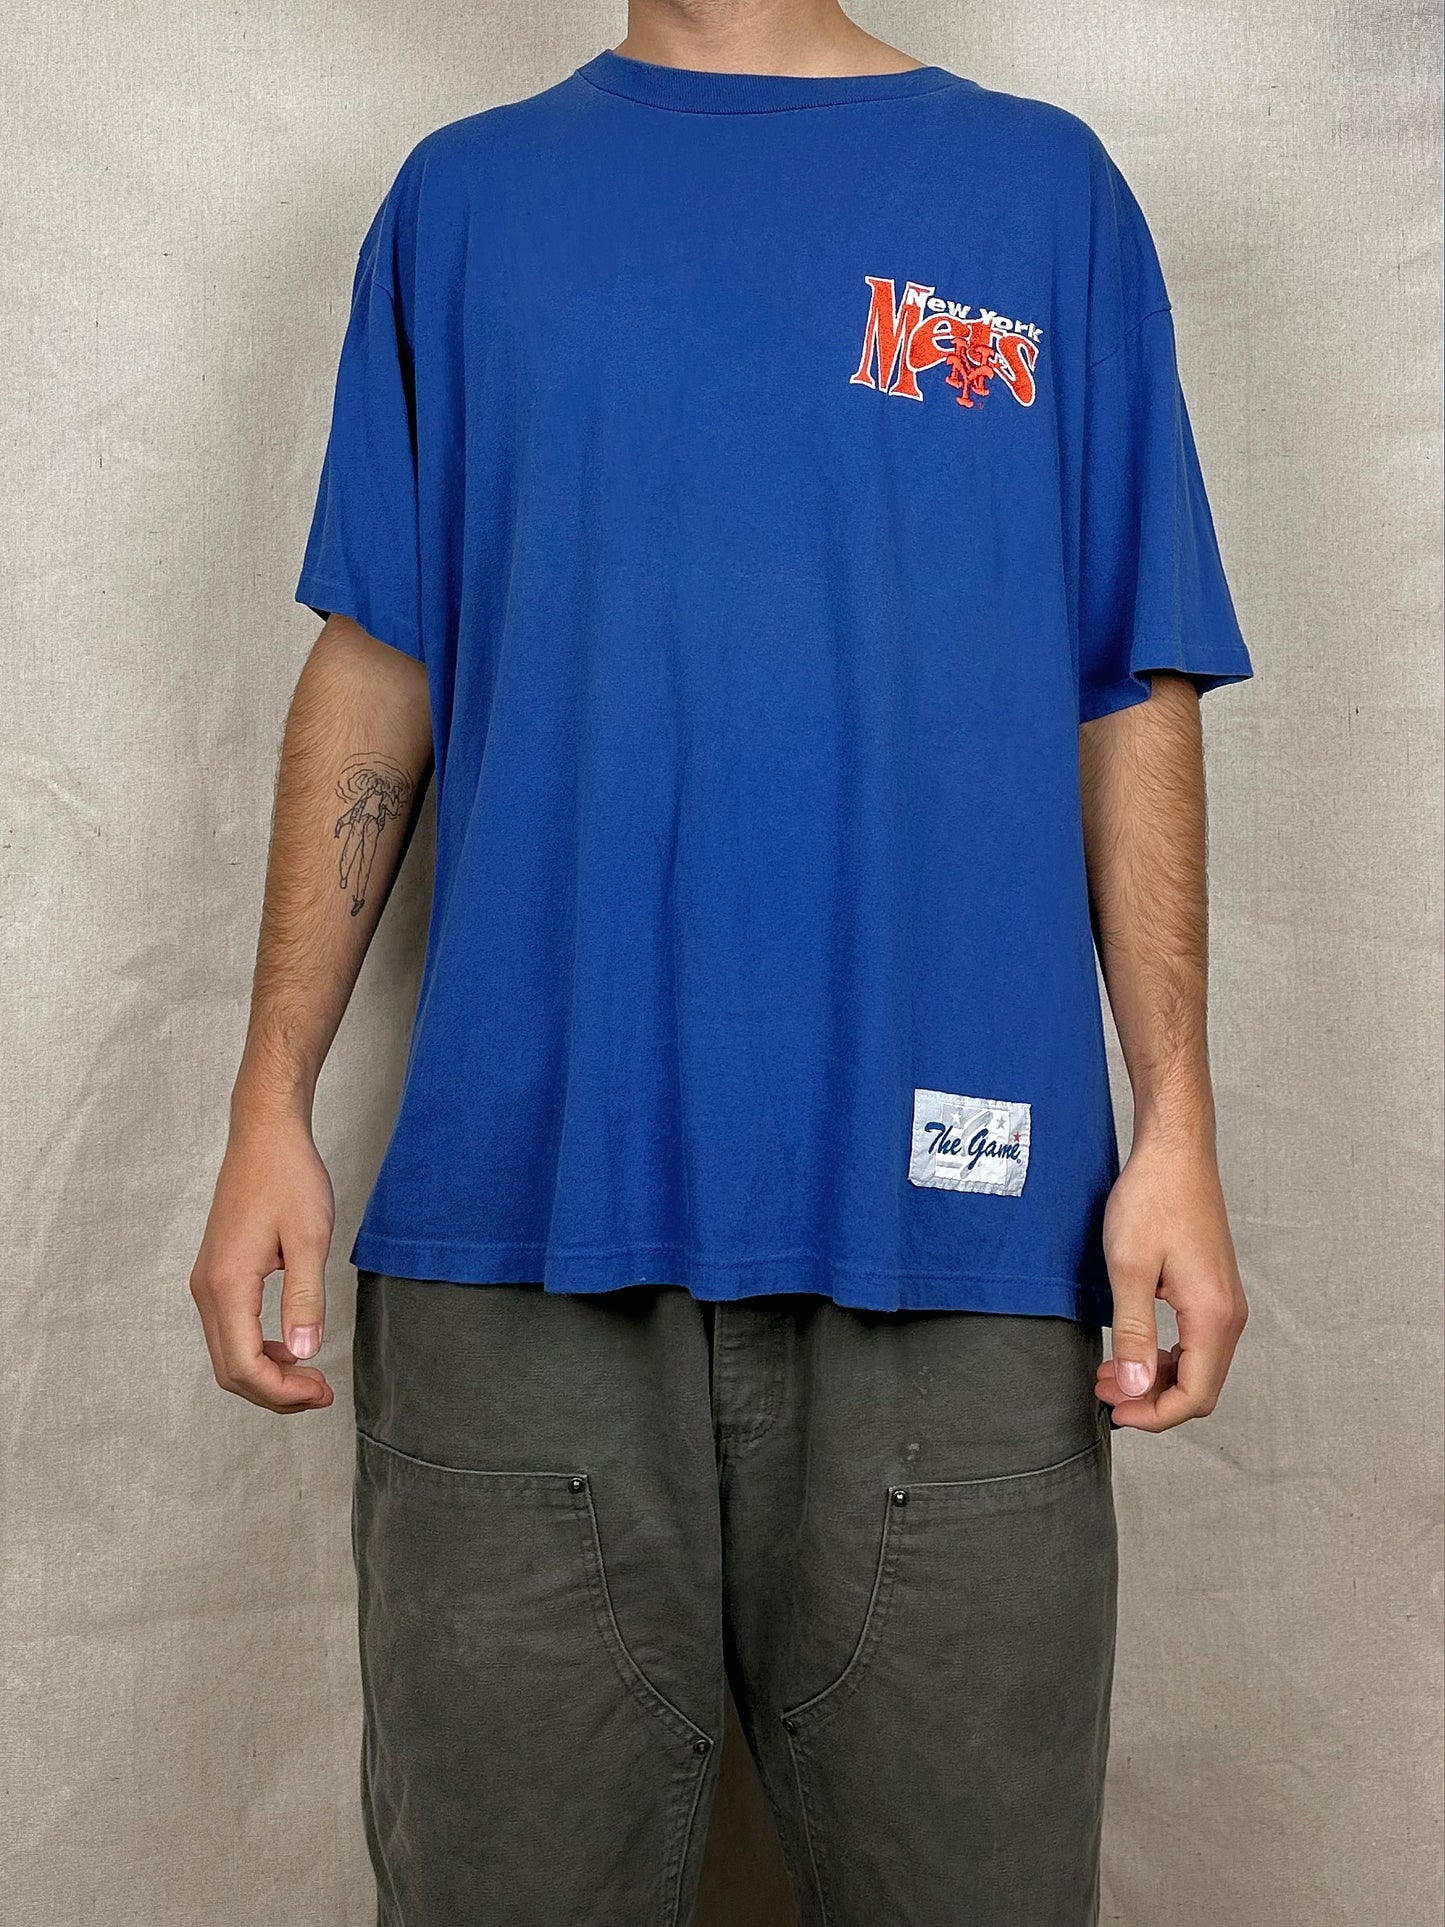 90's New York Mets MLB USA Made Embroidered Vintage T-Shirt Size XL